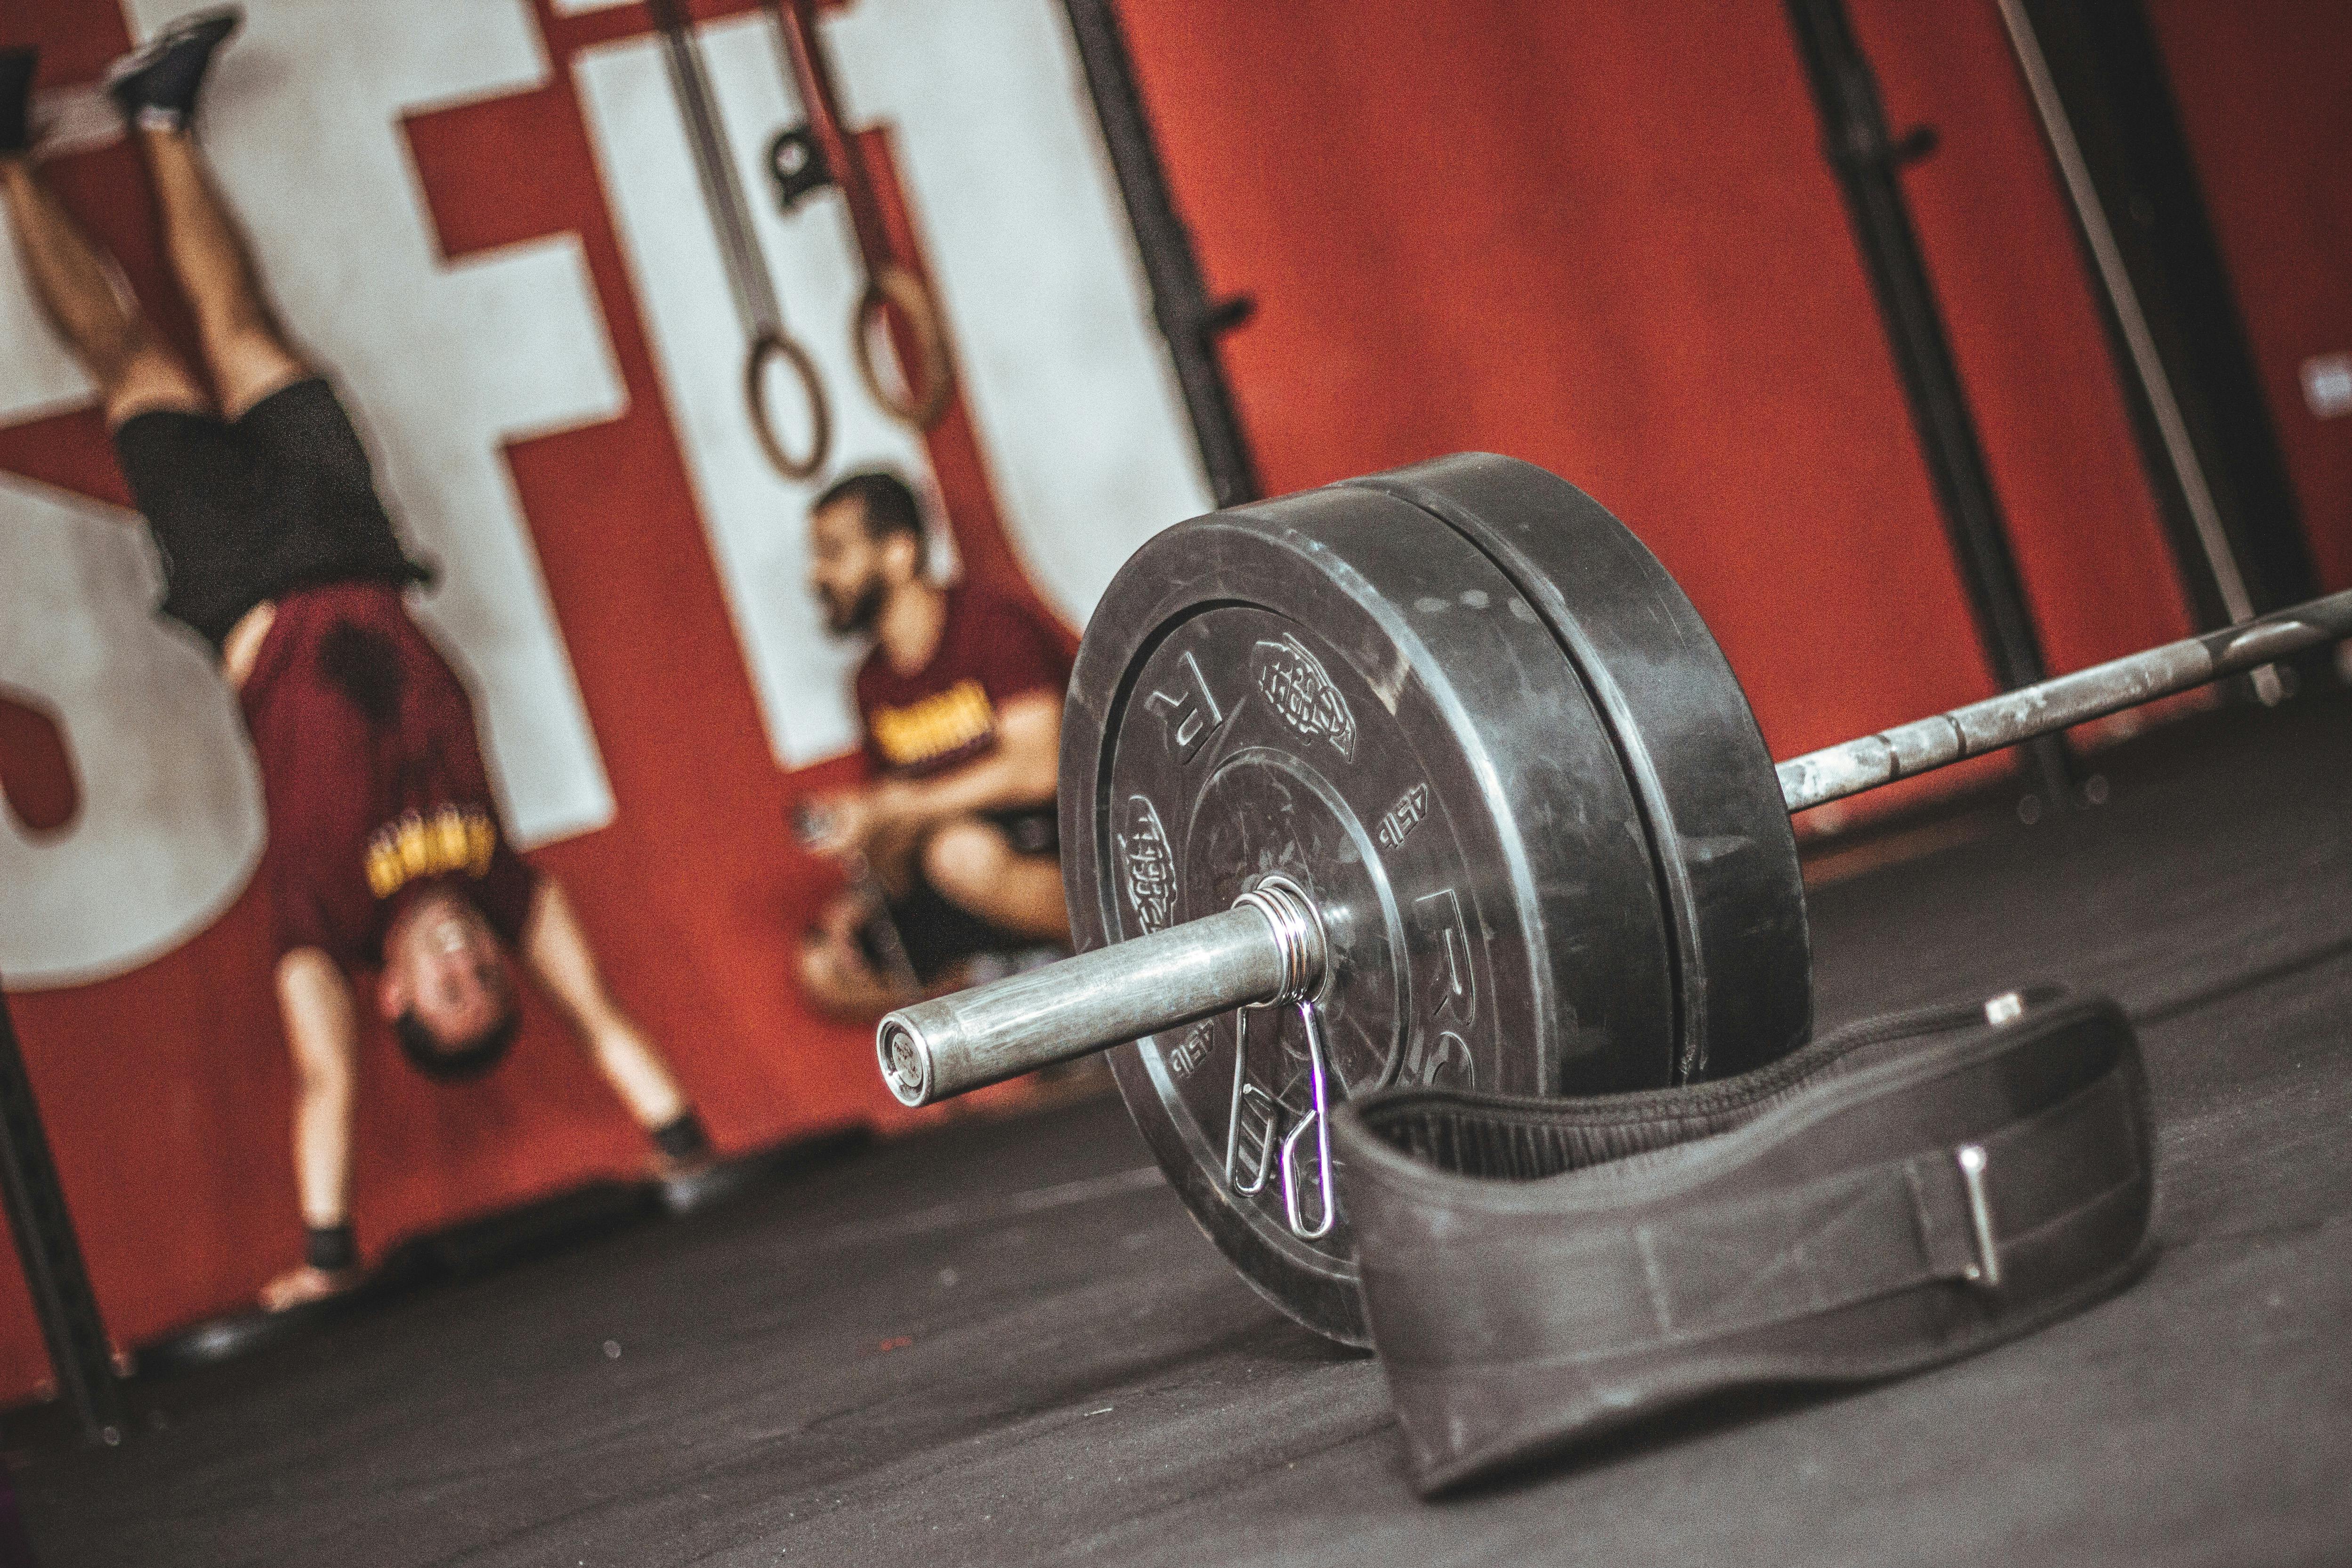 Crossfit Photos, Download The BEST Free Crossfit Stock Photos & HD Images